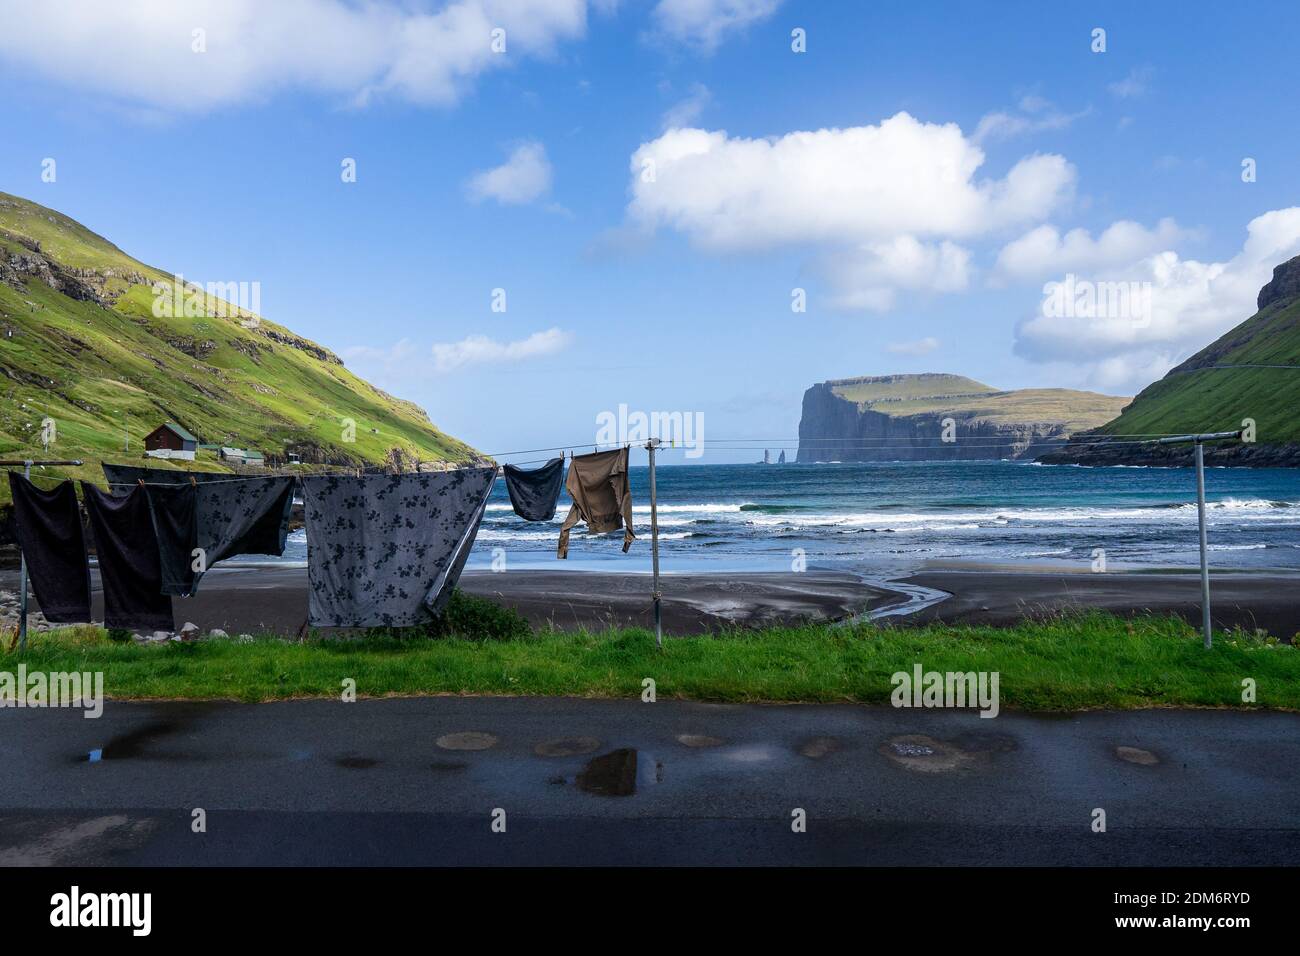 Viðareiði on Viðoy Island, Norðoyar Region, Faroe Island: Clean laundry hanging on a washing lines in a scenic place rounded by mountains. Stock Photo